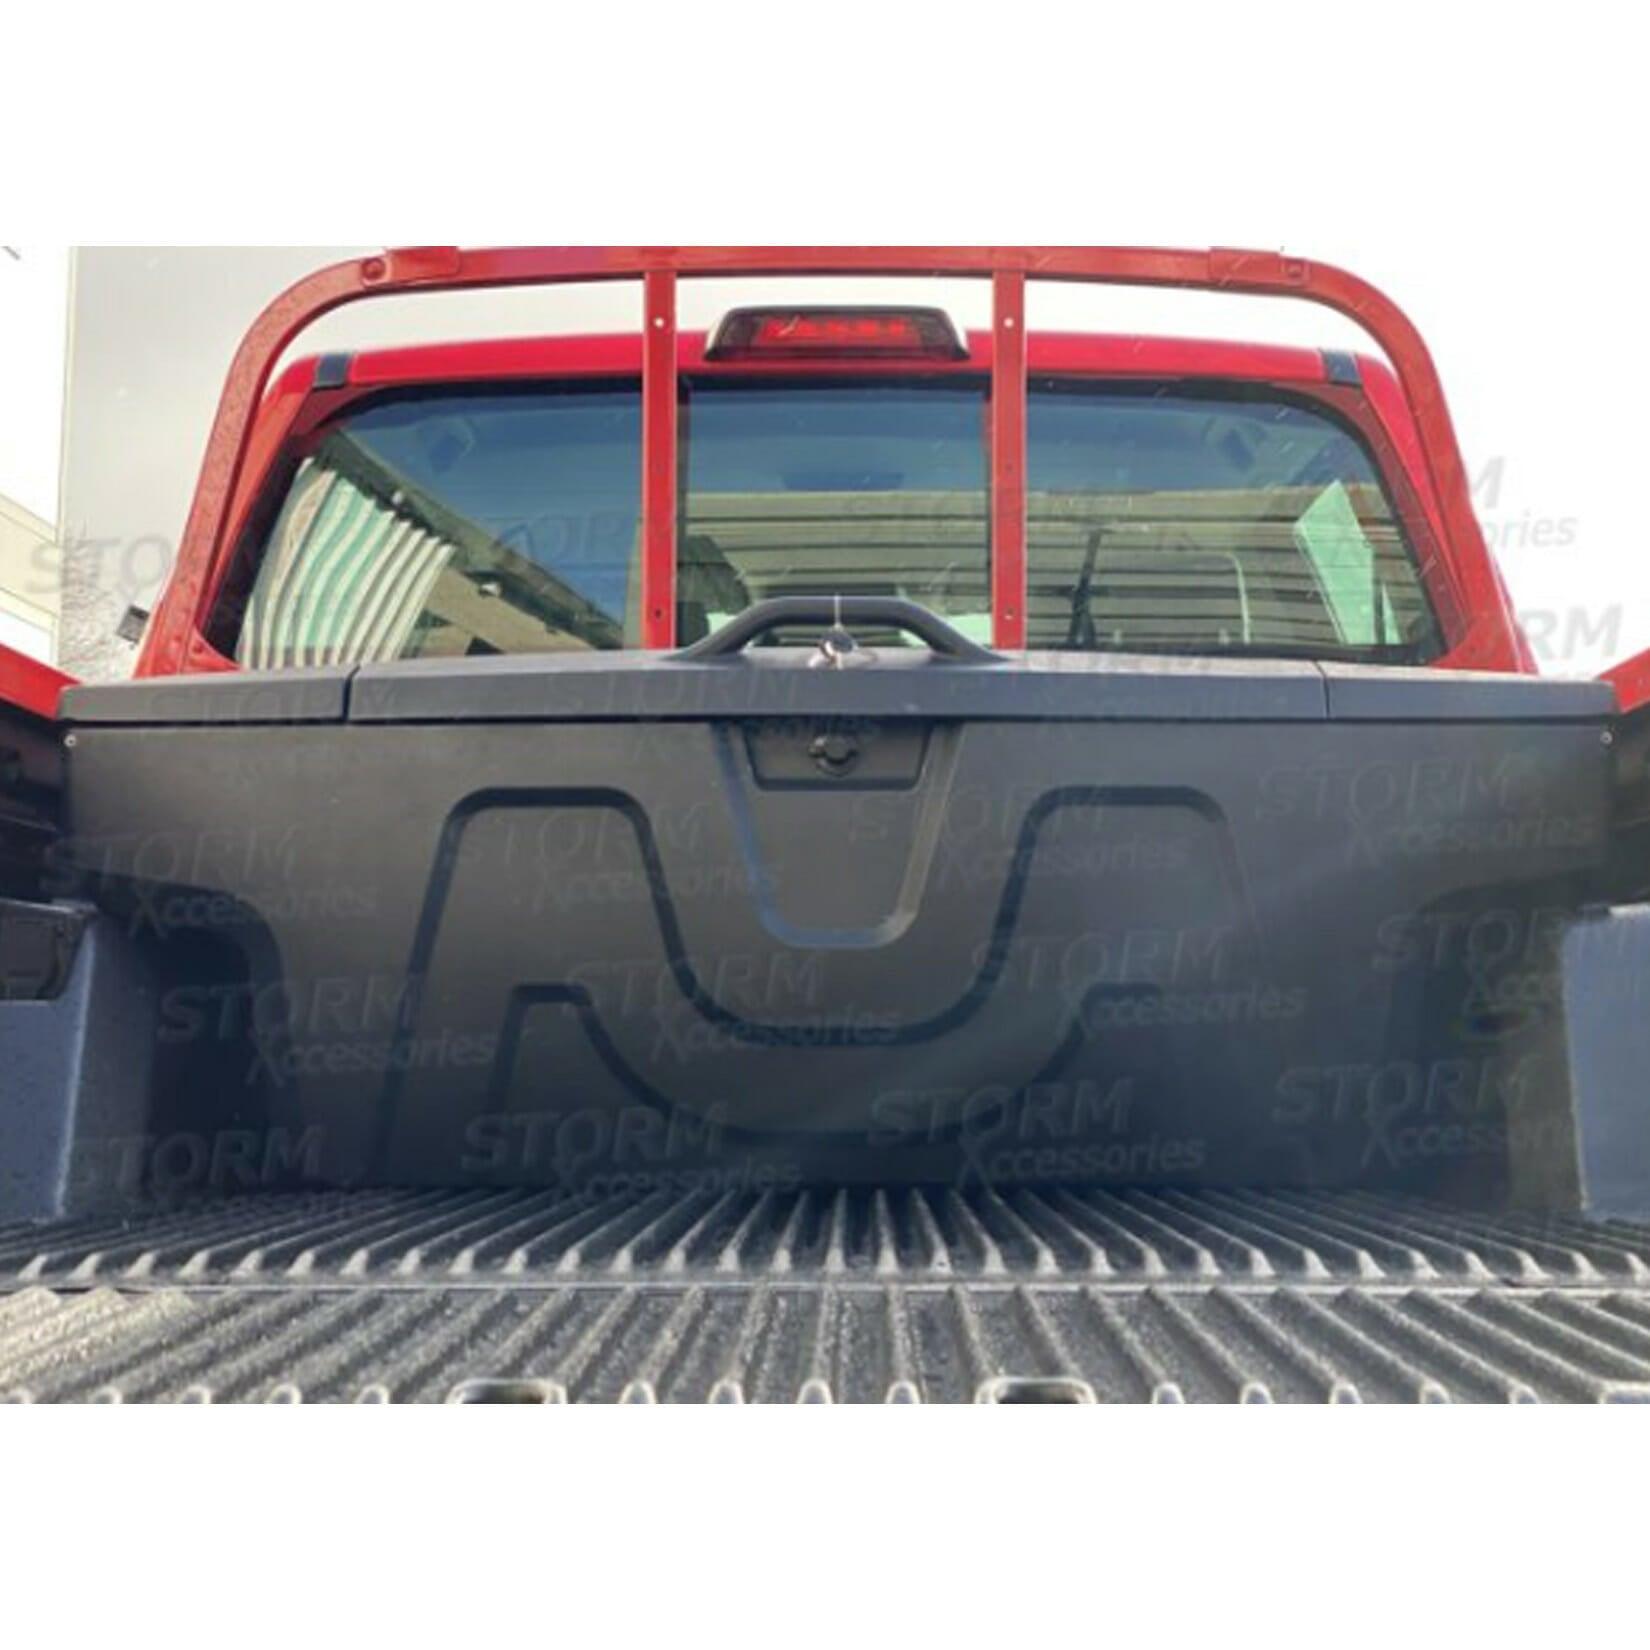 PICKUP TRUCK - LOAD BED TOOLBOX - STORAGE TOOL BOX - MIDDLE OPENING - Storm Xccessories2